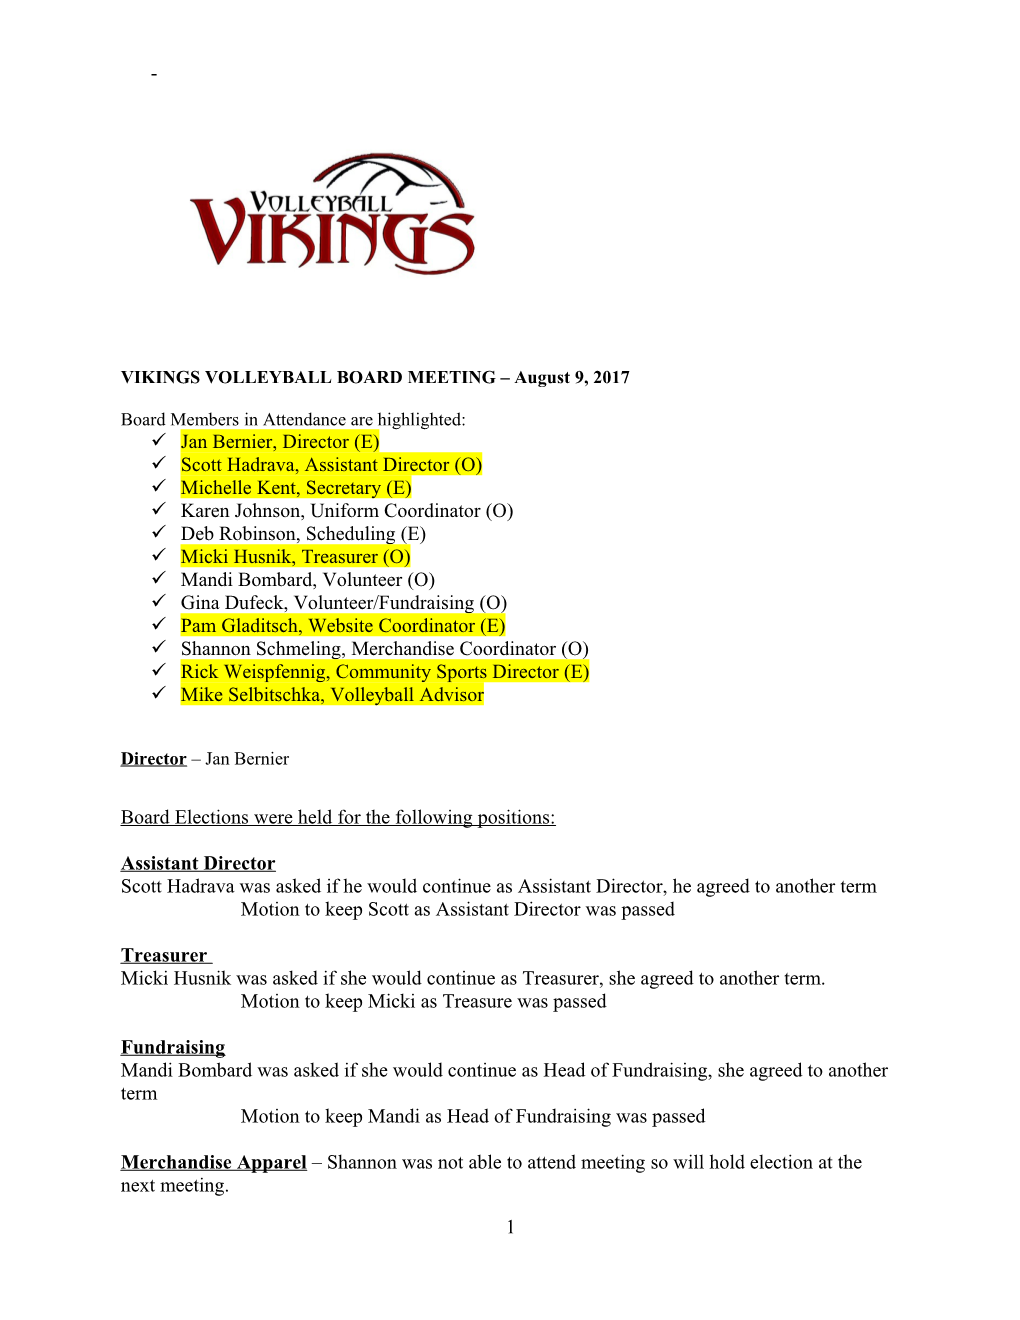 VIKINGS VOLLEYBALL BOARD MEETING August 9, 2017